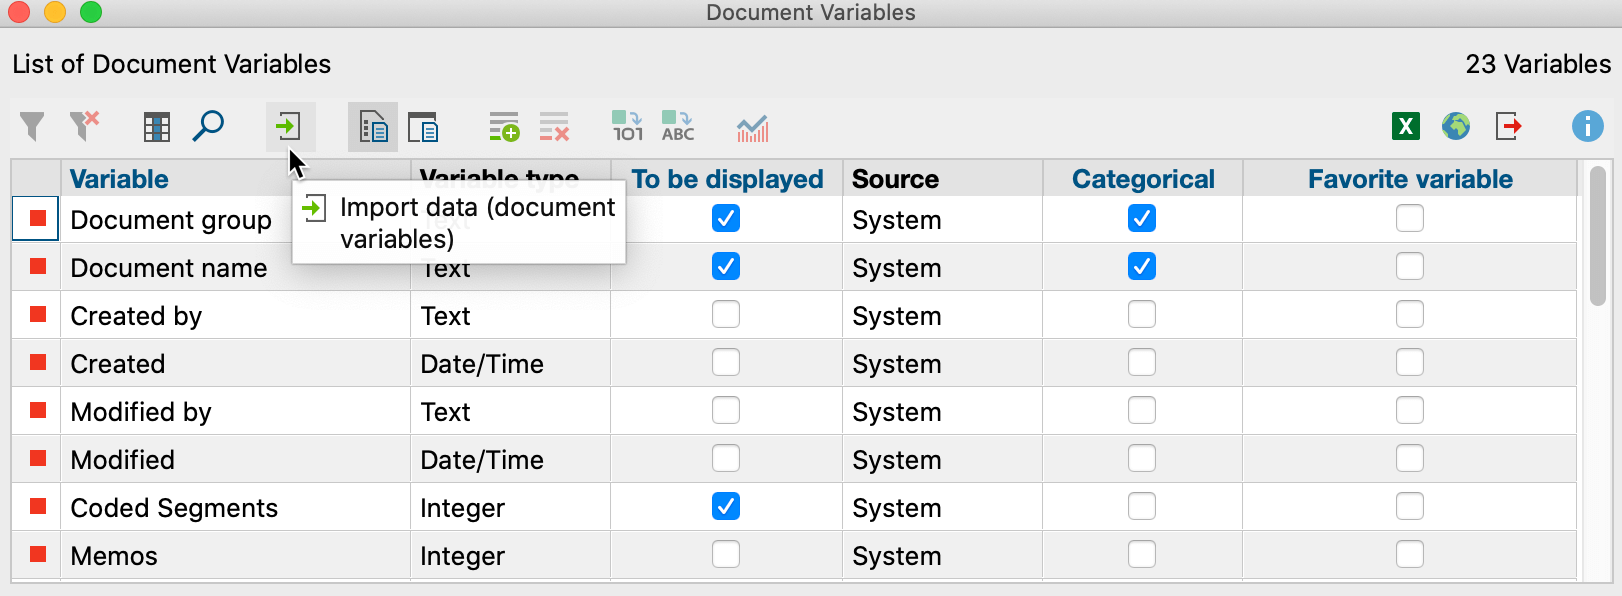 Icon for importing document variables